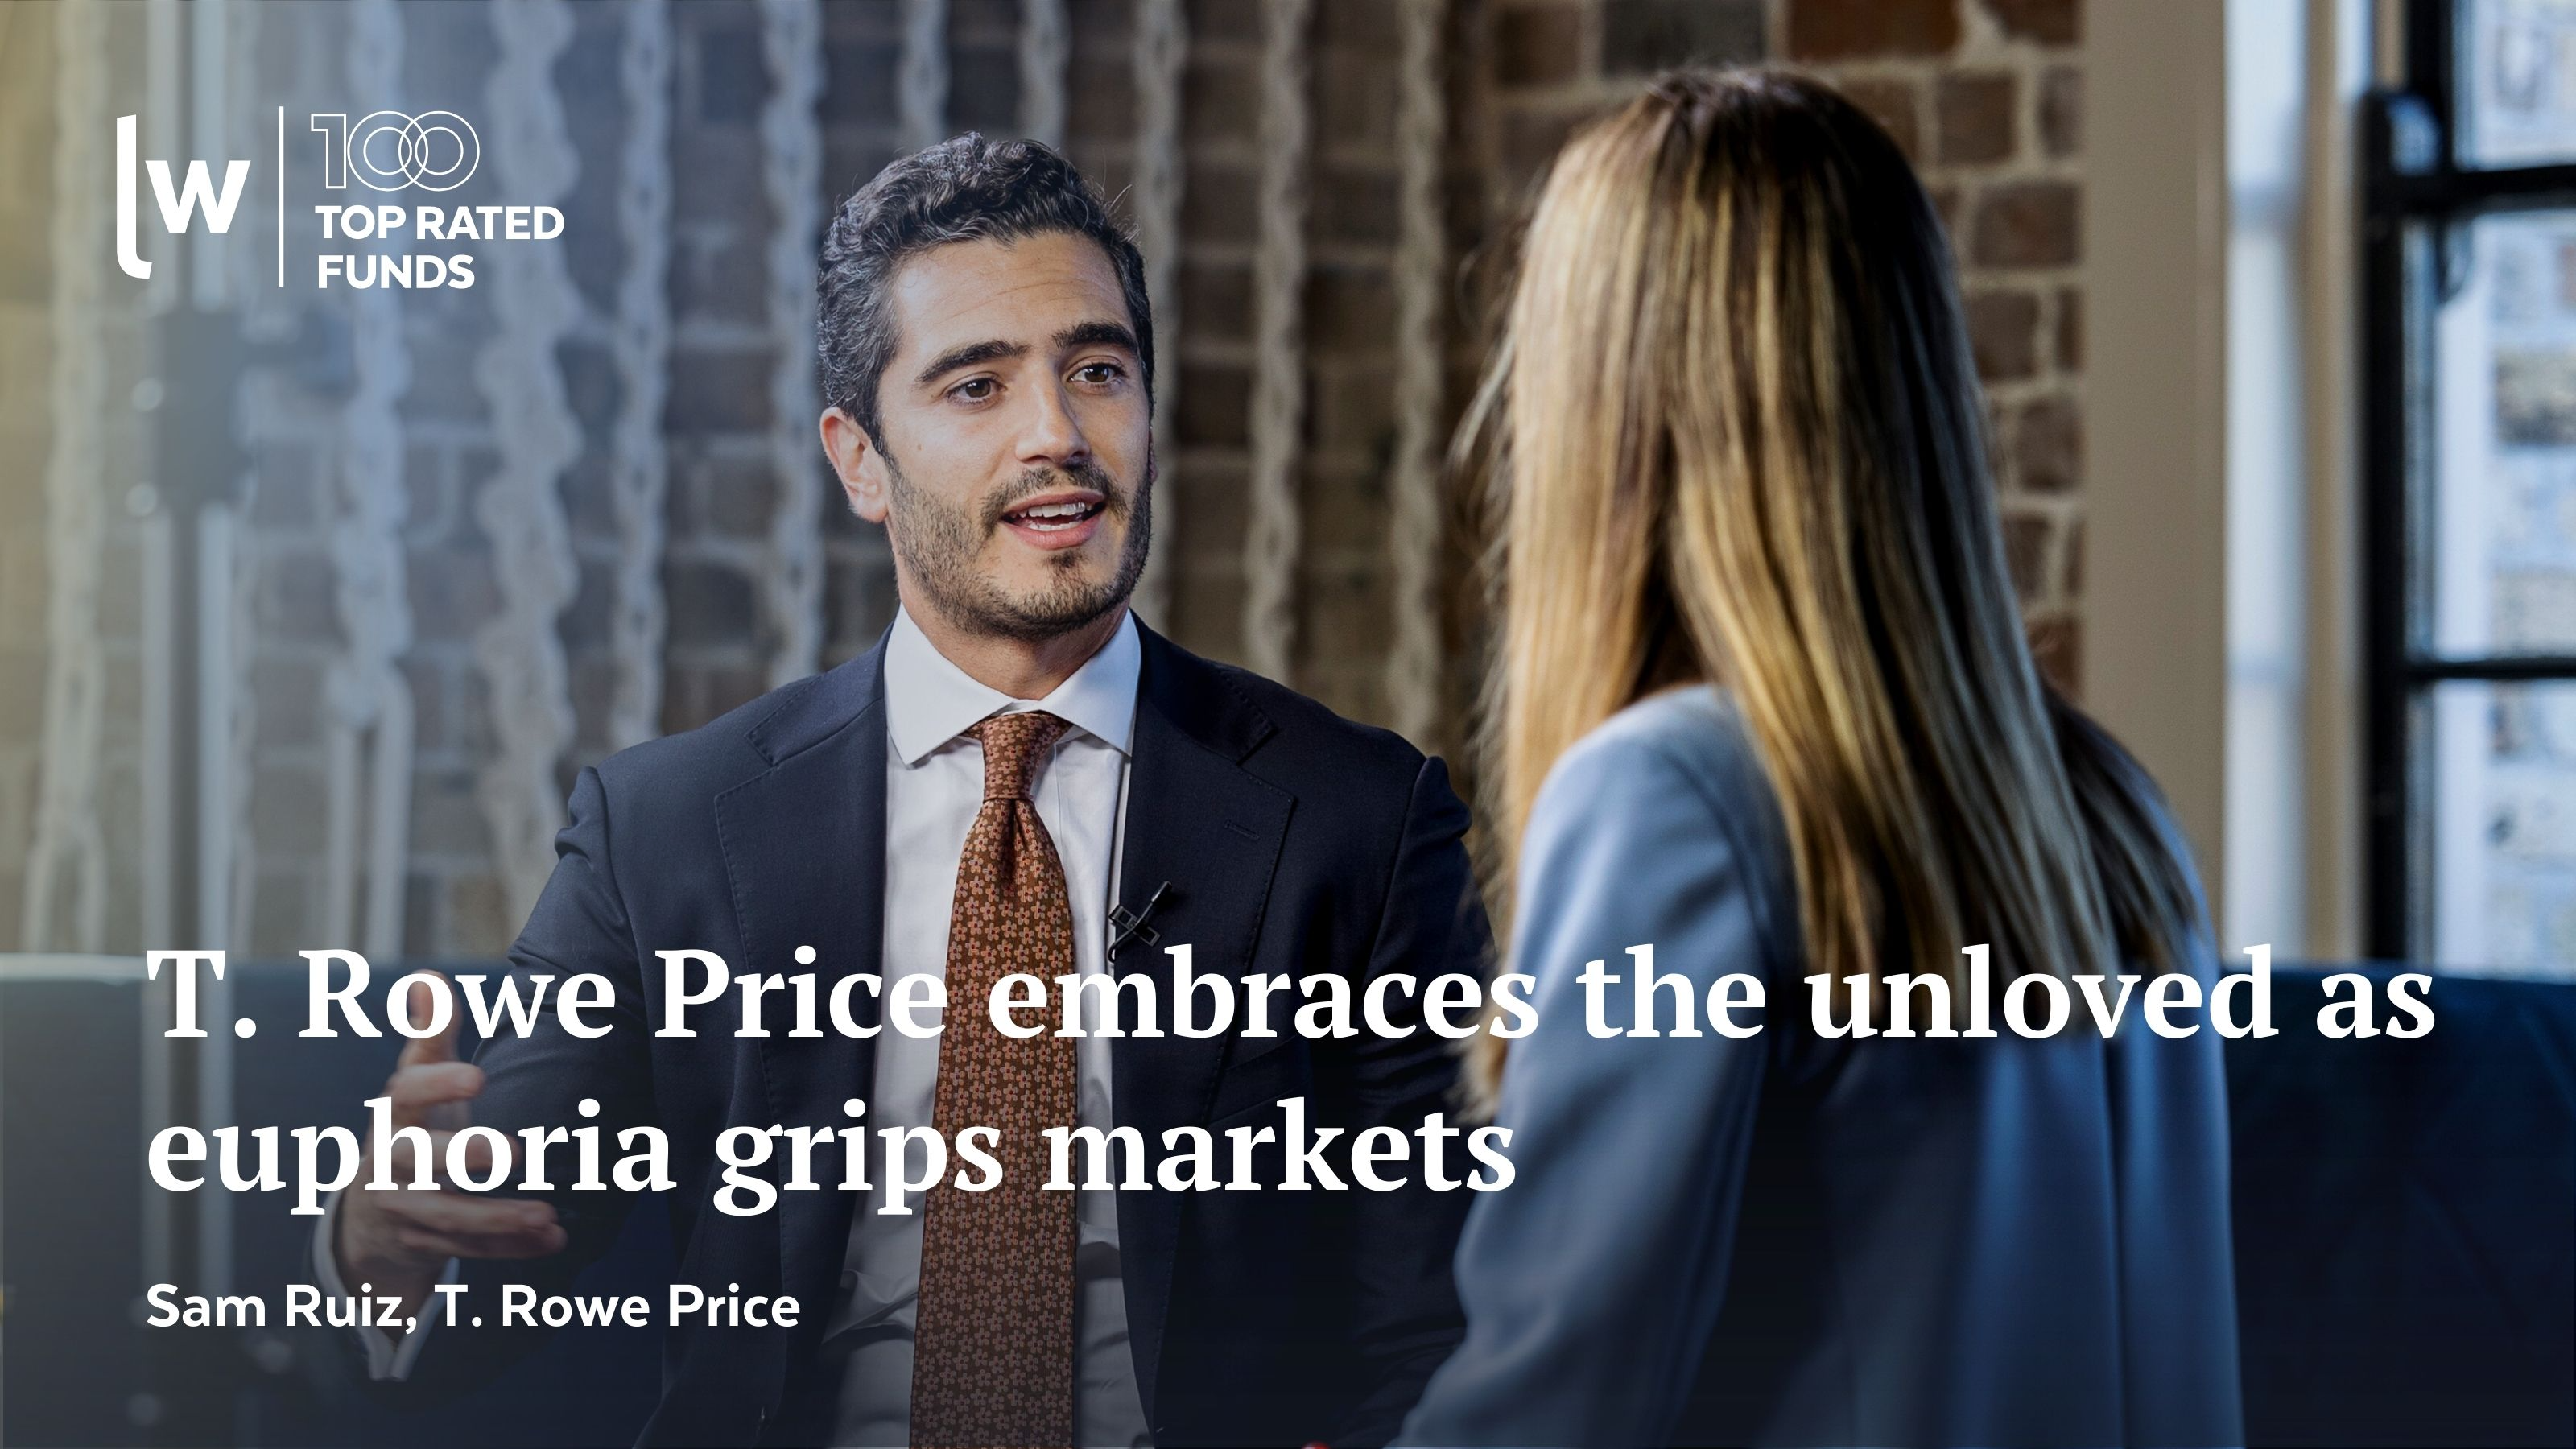 T. Rowe Price embraces the unloved as euphoria grips markets - Livewire Markets